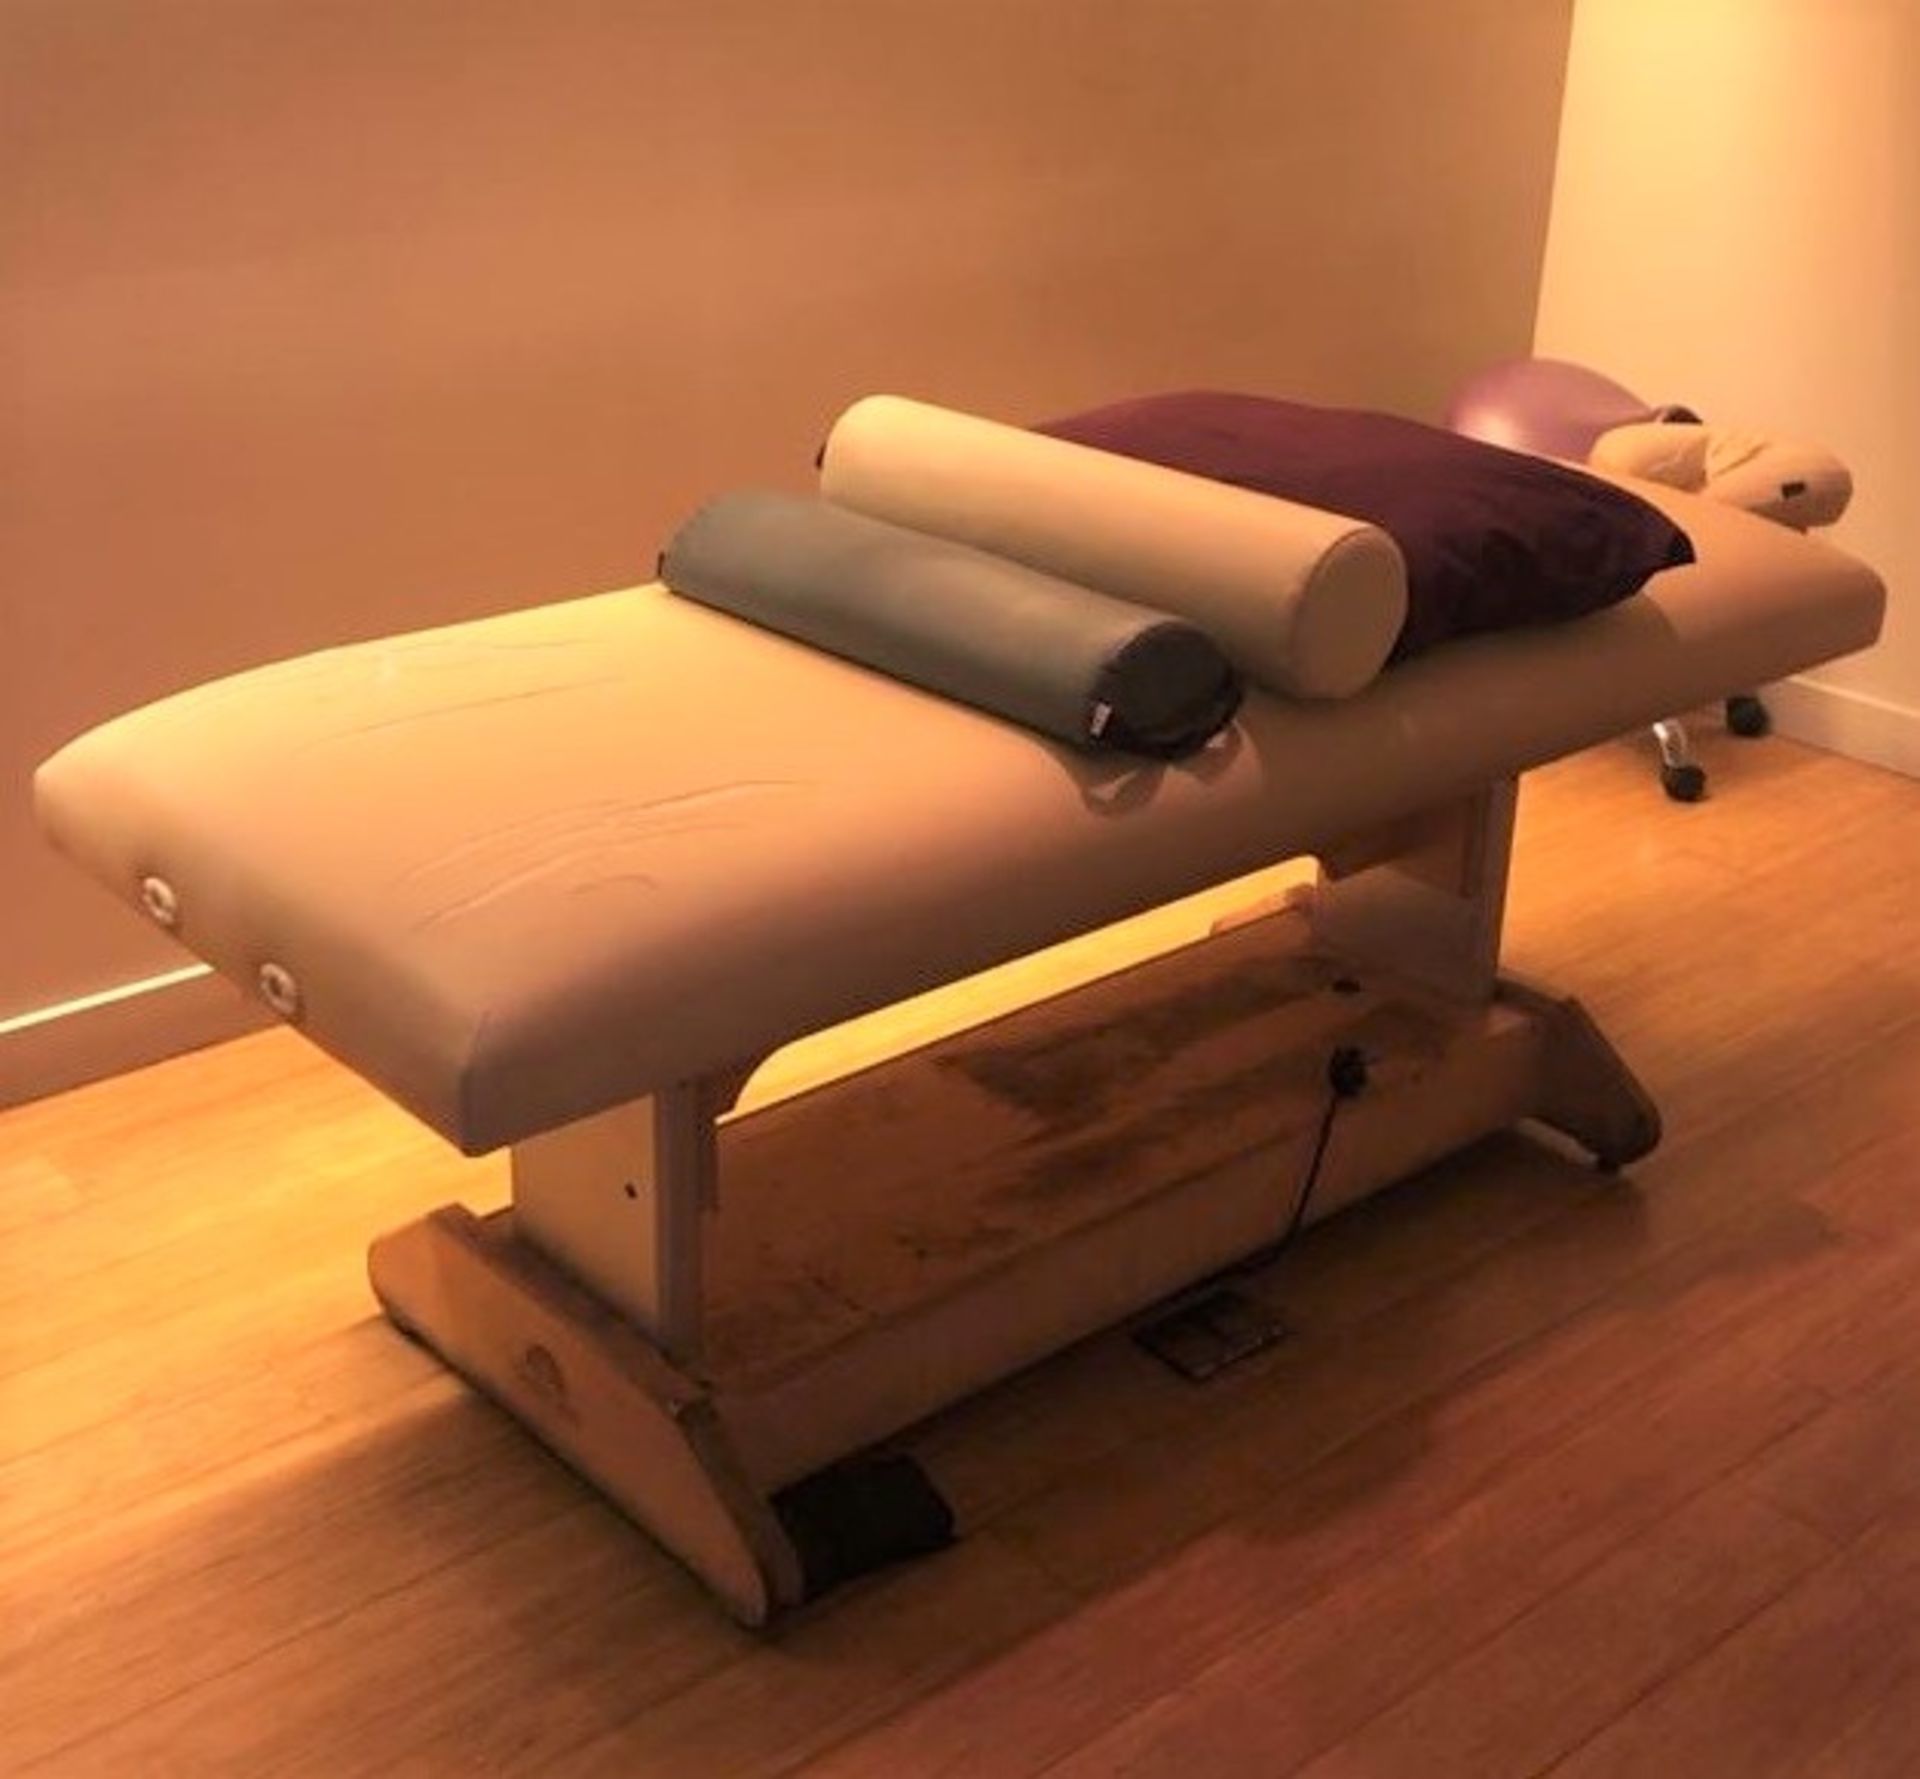 2 x Oakworks Clinician Electric-Hydraulic Massage Tables With Footpedals and Linak HBWO Remote - Image 4 of 8